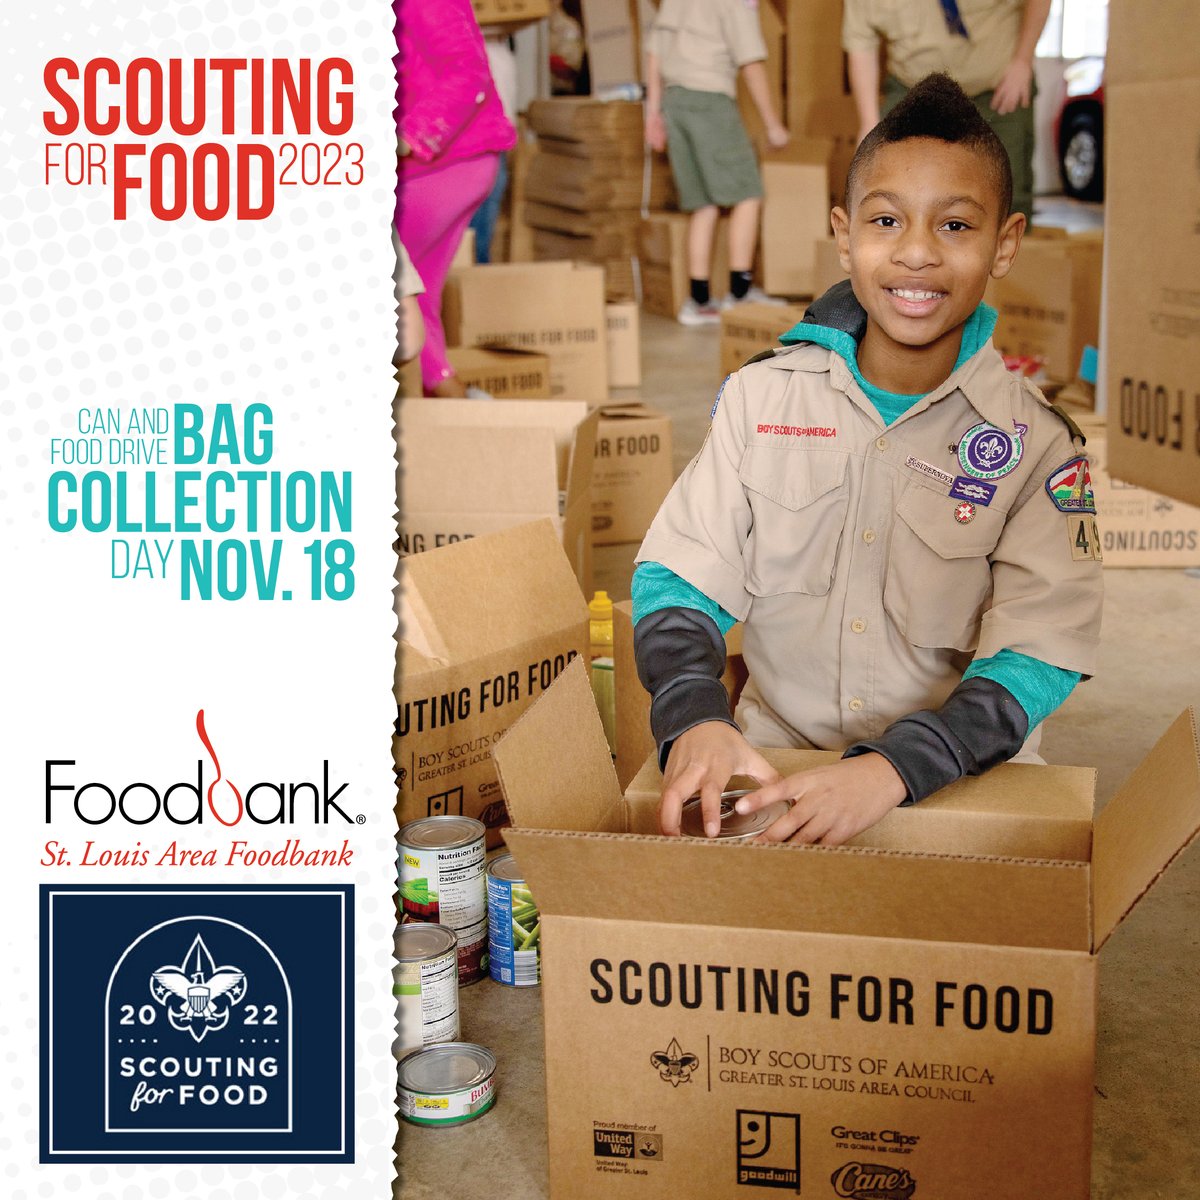 Tomorrow is the @boyscouts Scouting for Food Collection Day! Scouts from your area will come by this morning to collect the blue donation bags or you can drop it at one of the drop off locations: stlbsa.org/scouting-for-f…. bit.ly/HolidayBestFoo… Thank you!